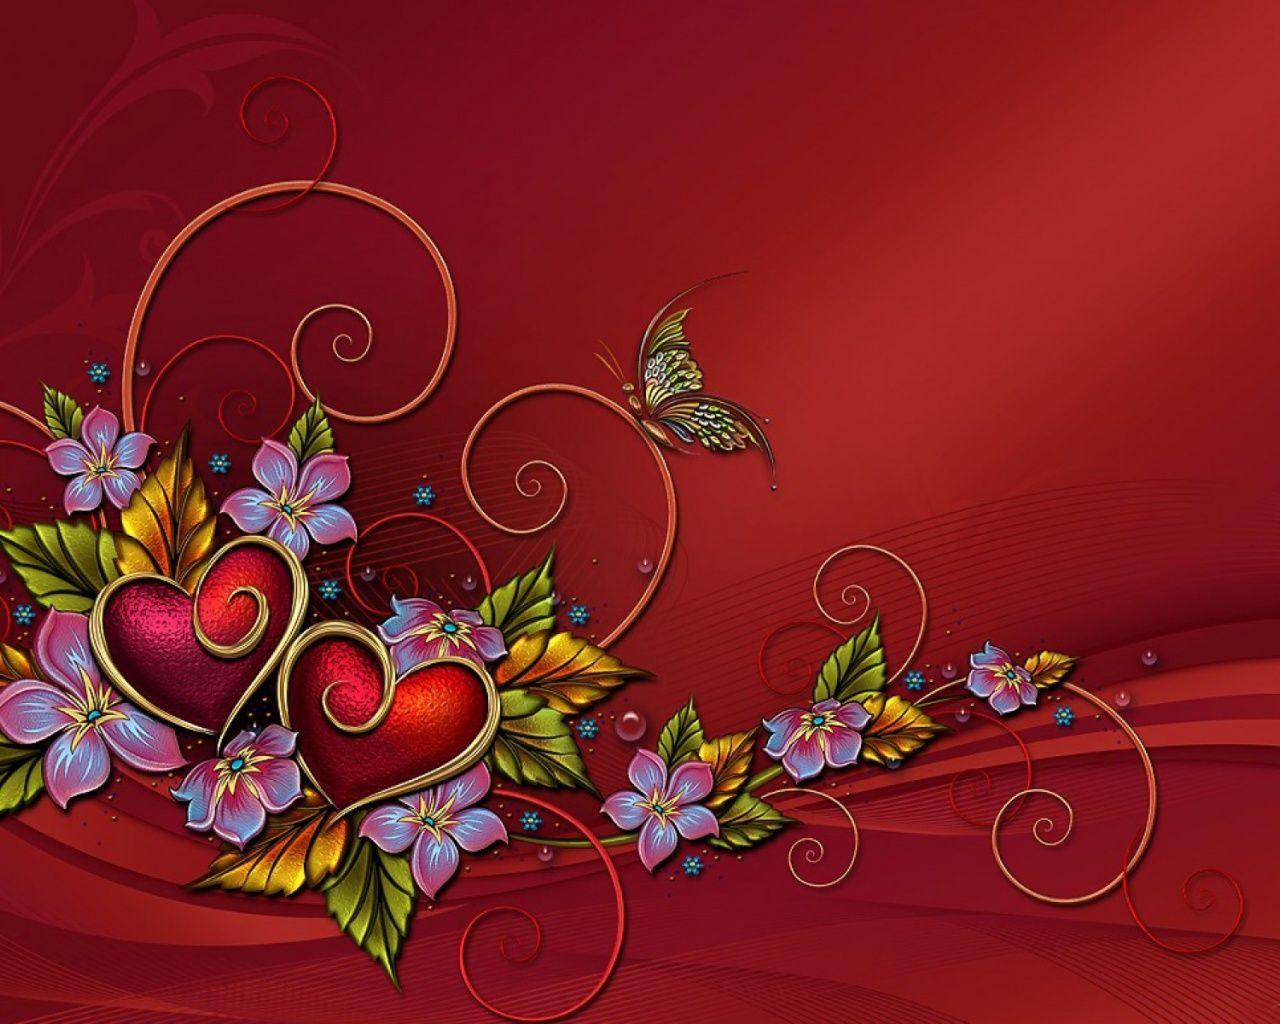 Hearts Flowers Wallpapers - Top Free Hearts Flowers Backgrounds ...